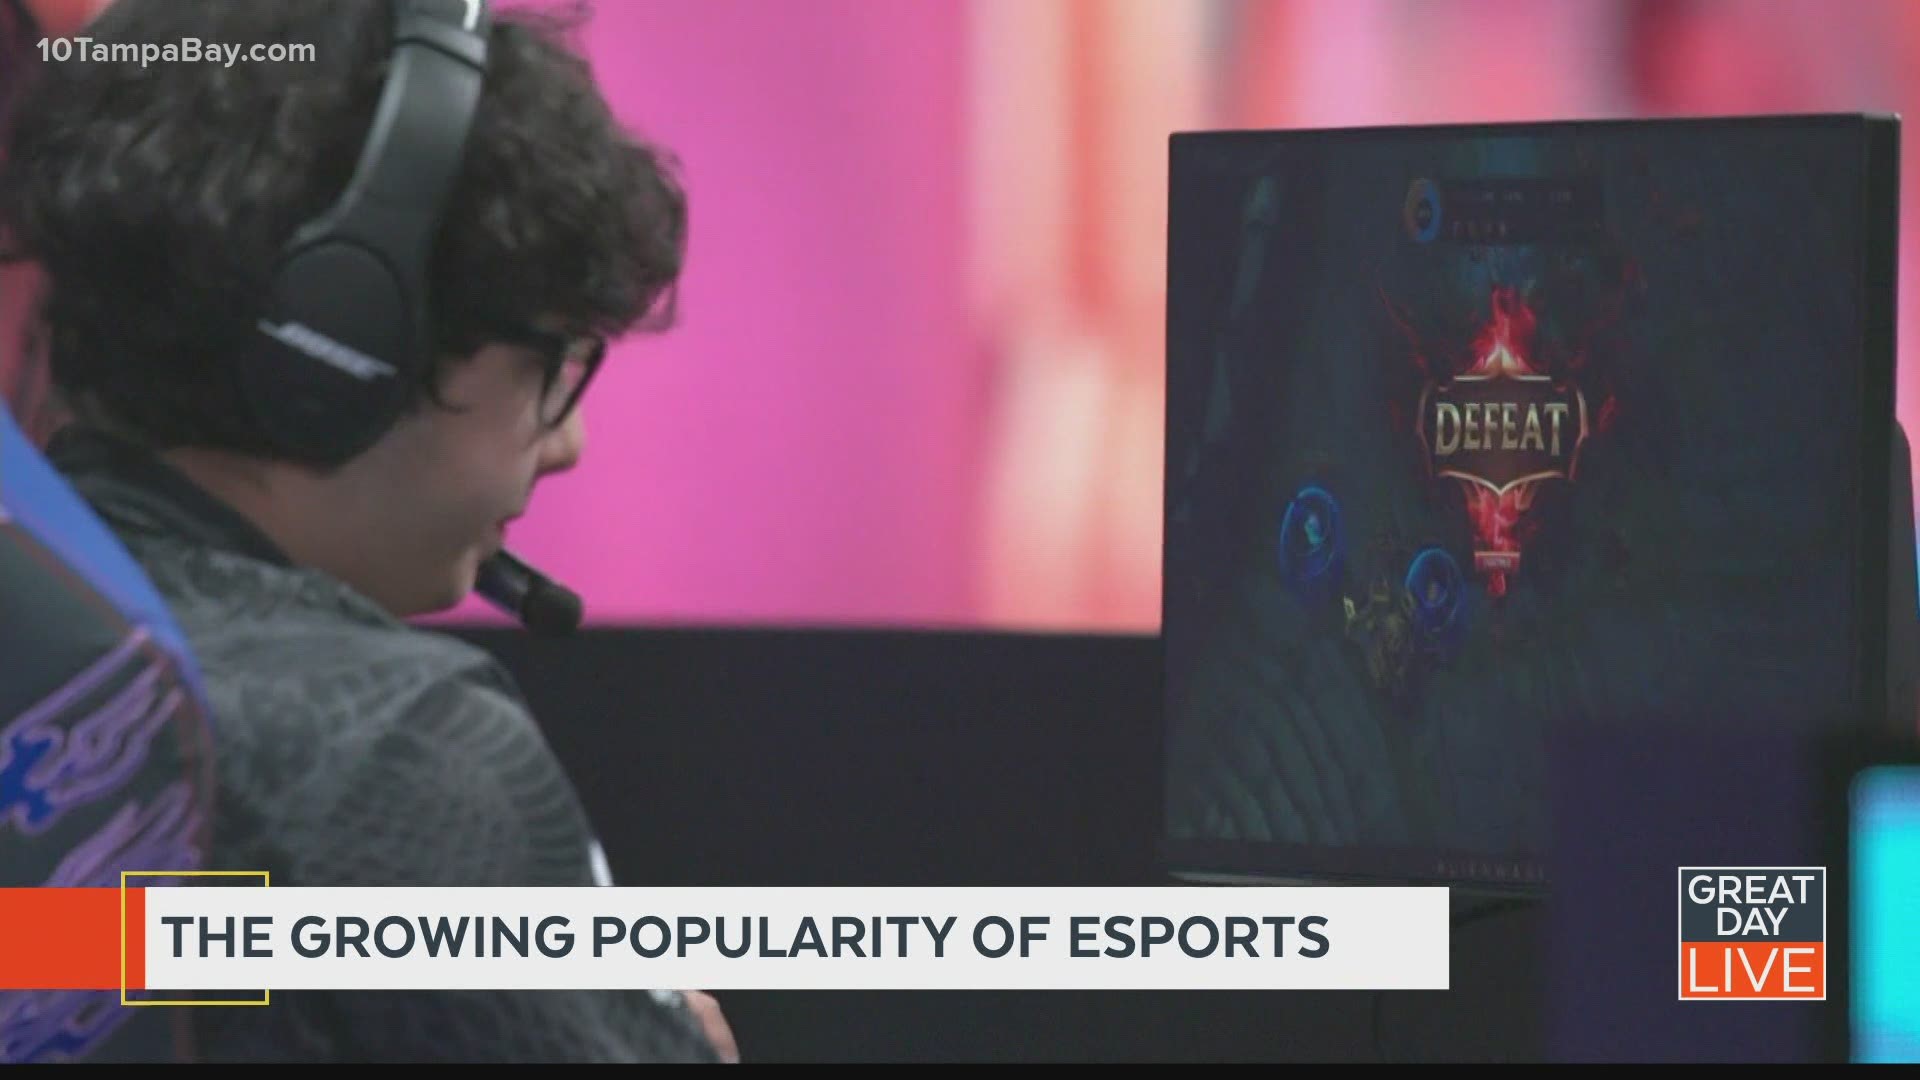 The growing popularity of Esports